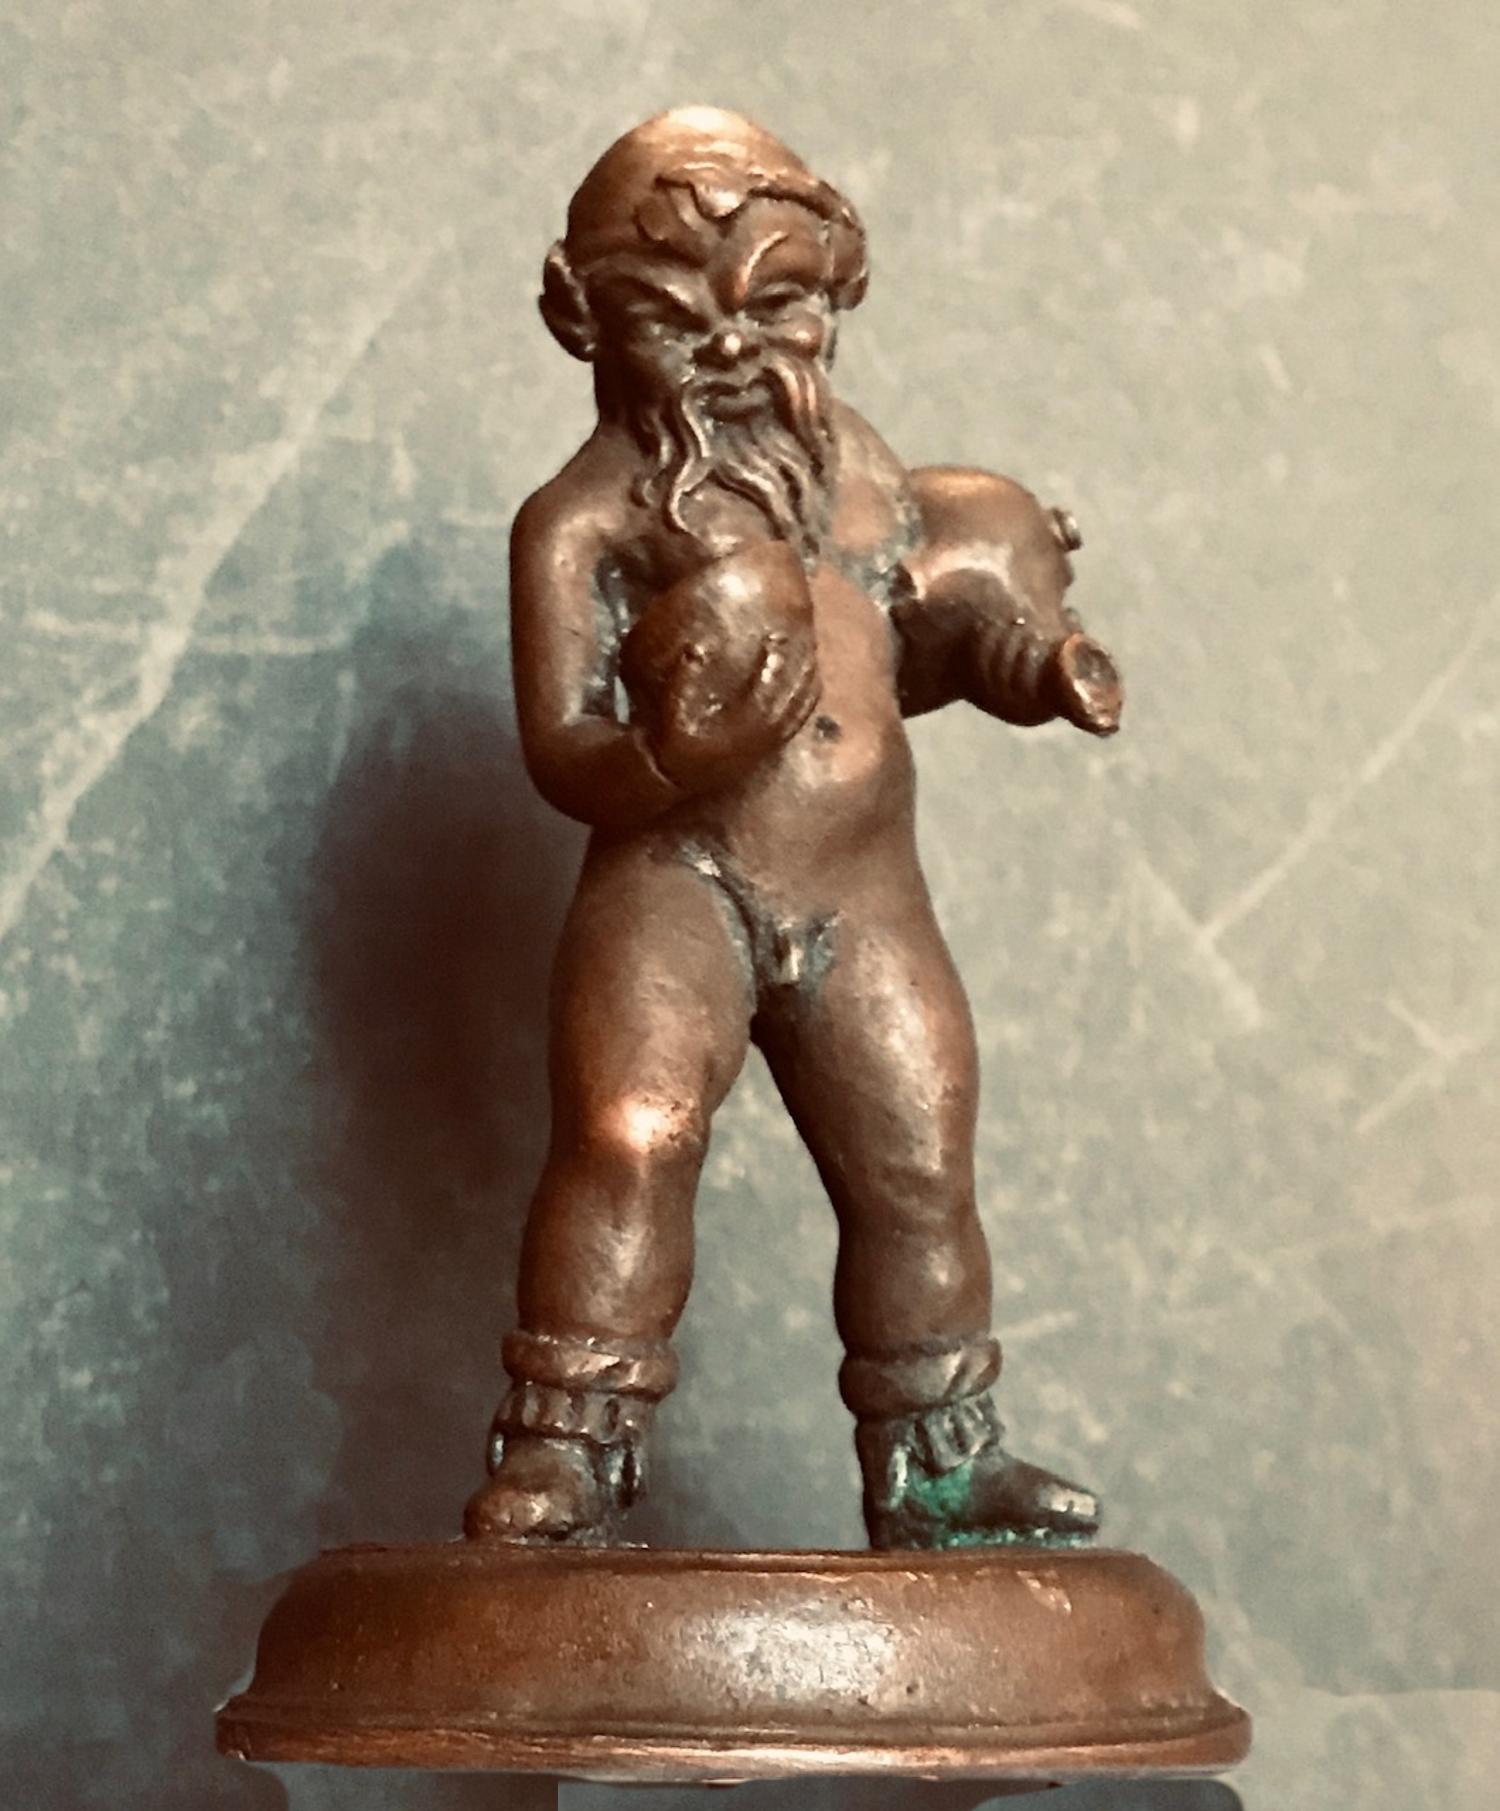 Bronze statuette of aquarius -after the antique- mythological water bearer sculpture.

This North Italian statuette from the 16th or 17th century is the Greek figure, Aquarius, whose name is Latin for “Water Bearer” or “Cup Bearer”, and is